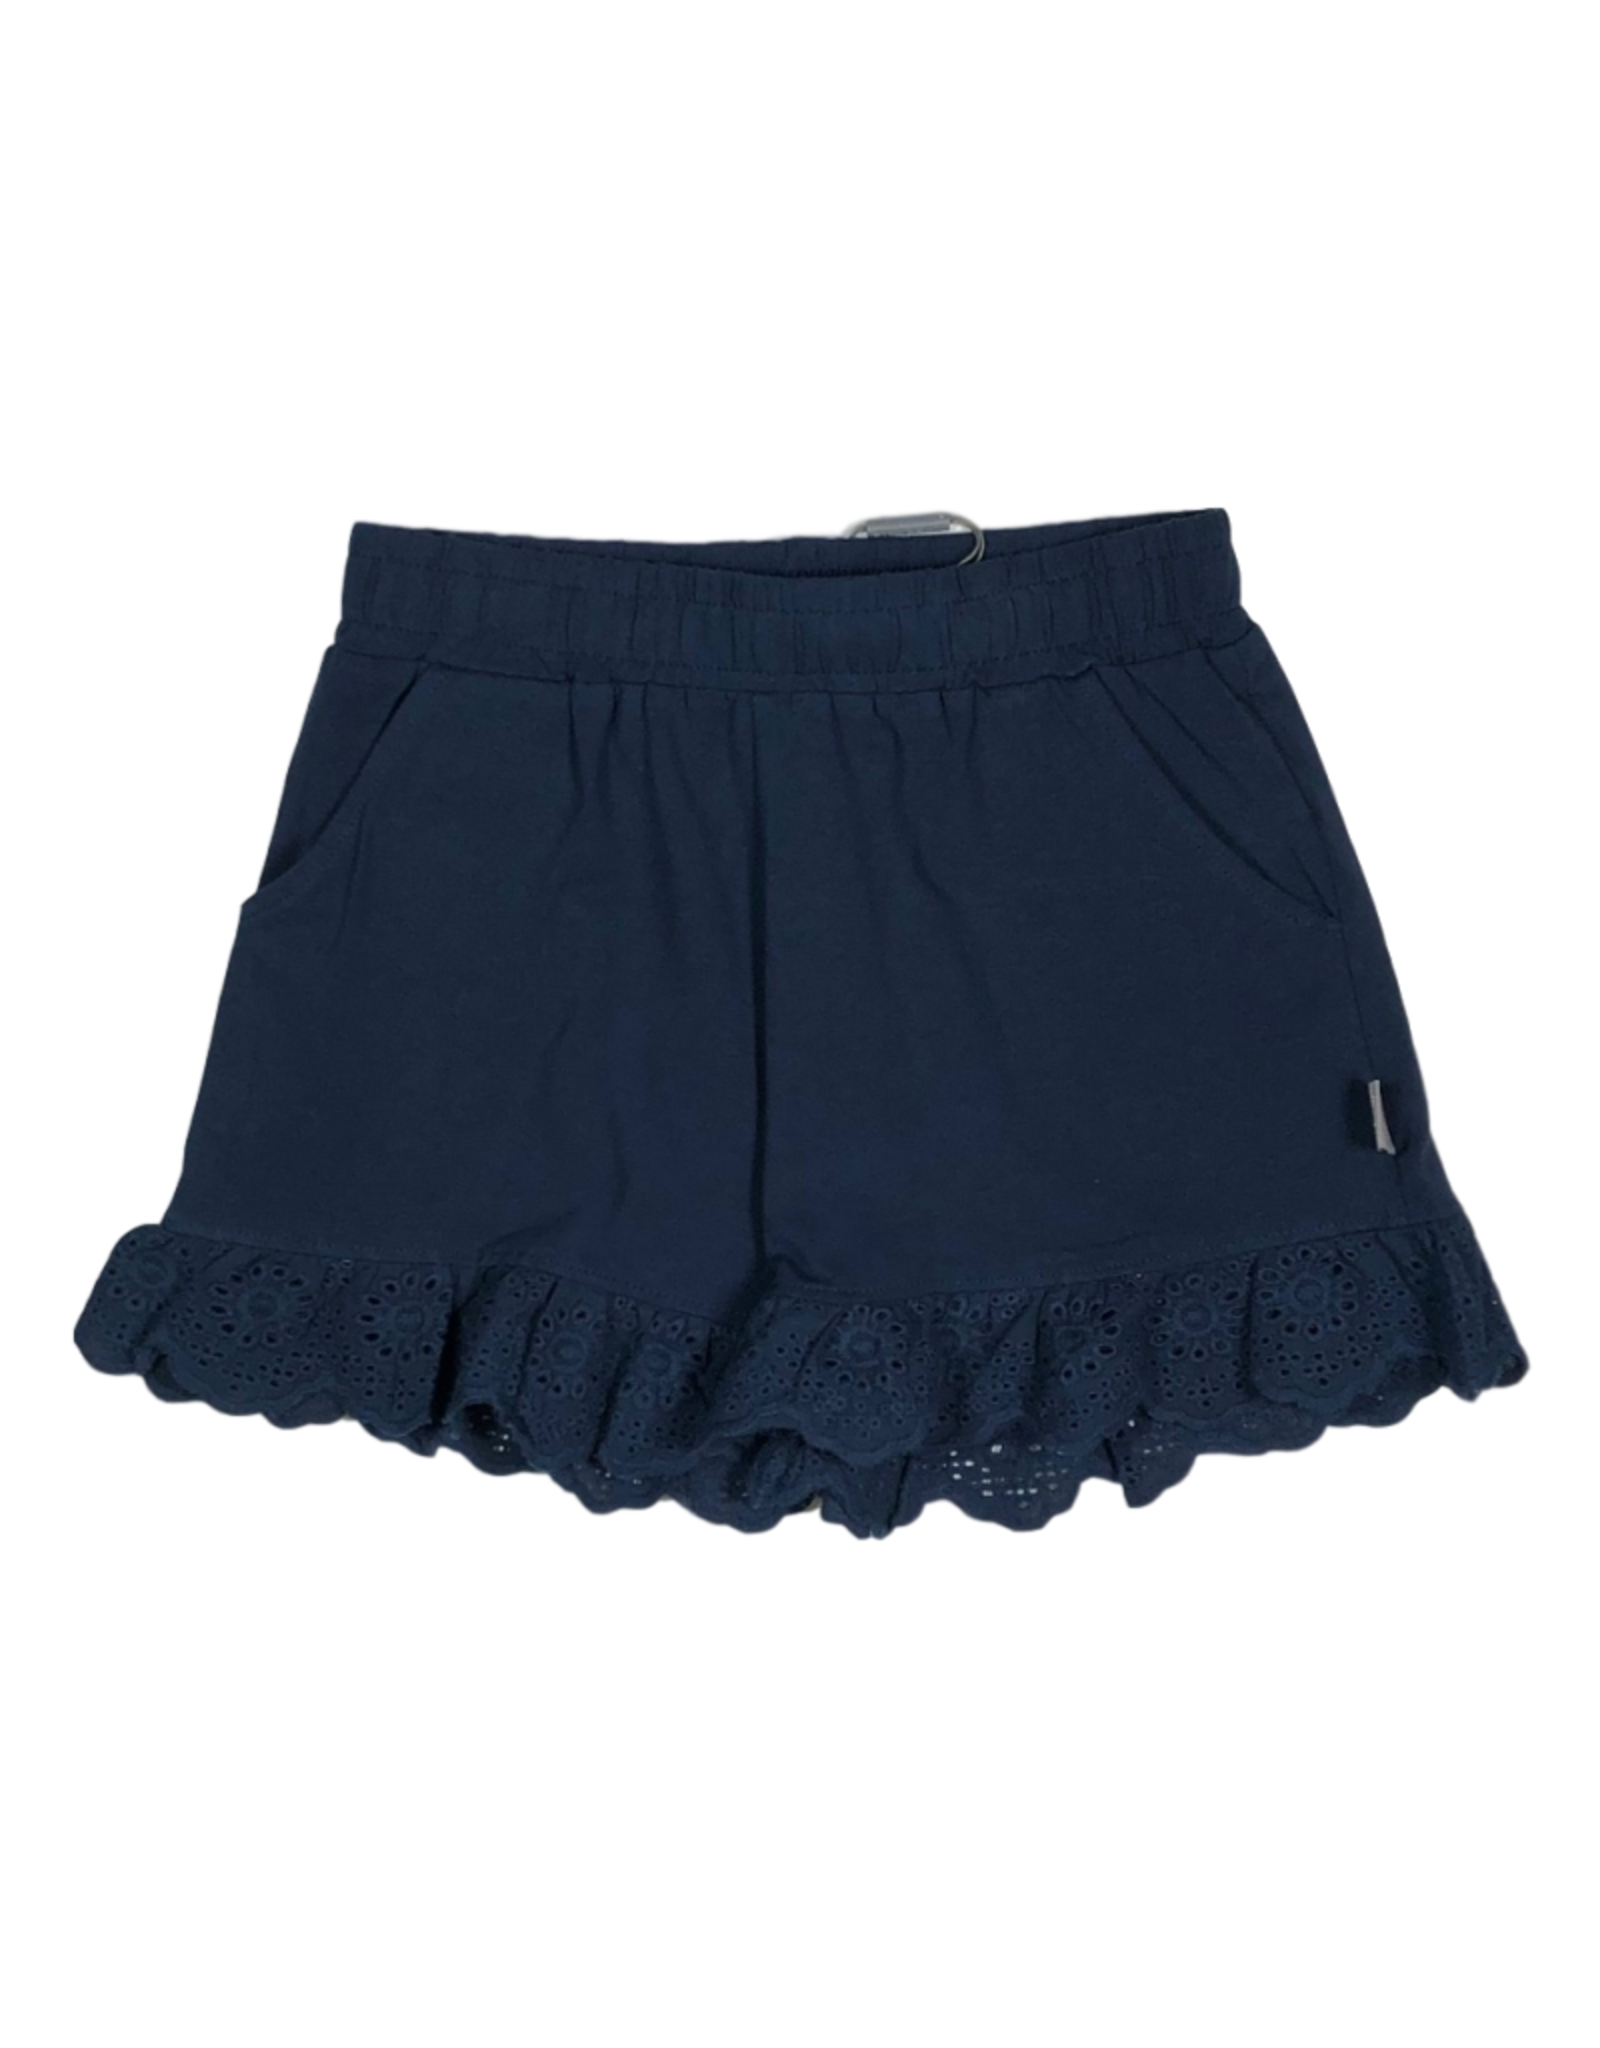 Creamie 821414 Lace Knit Short navy